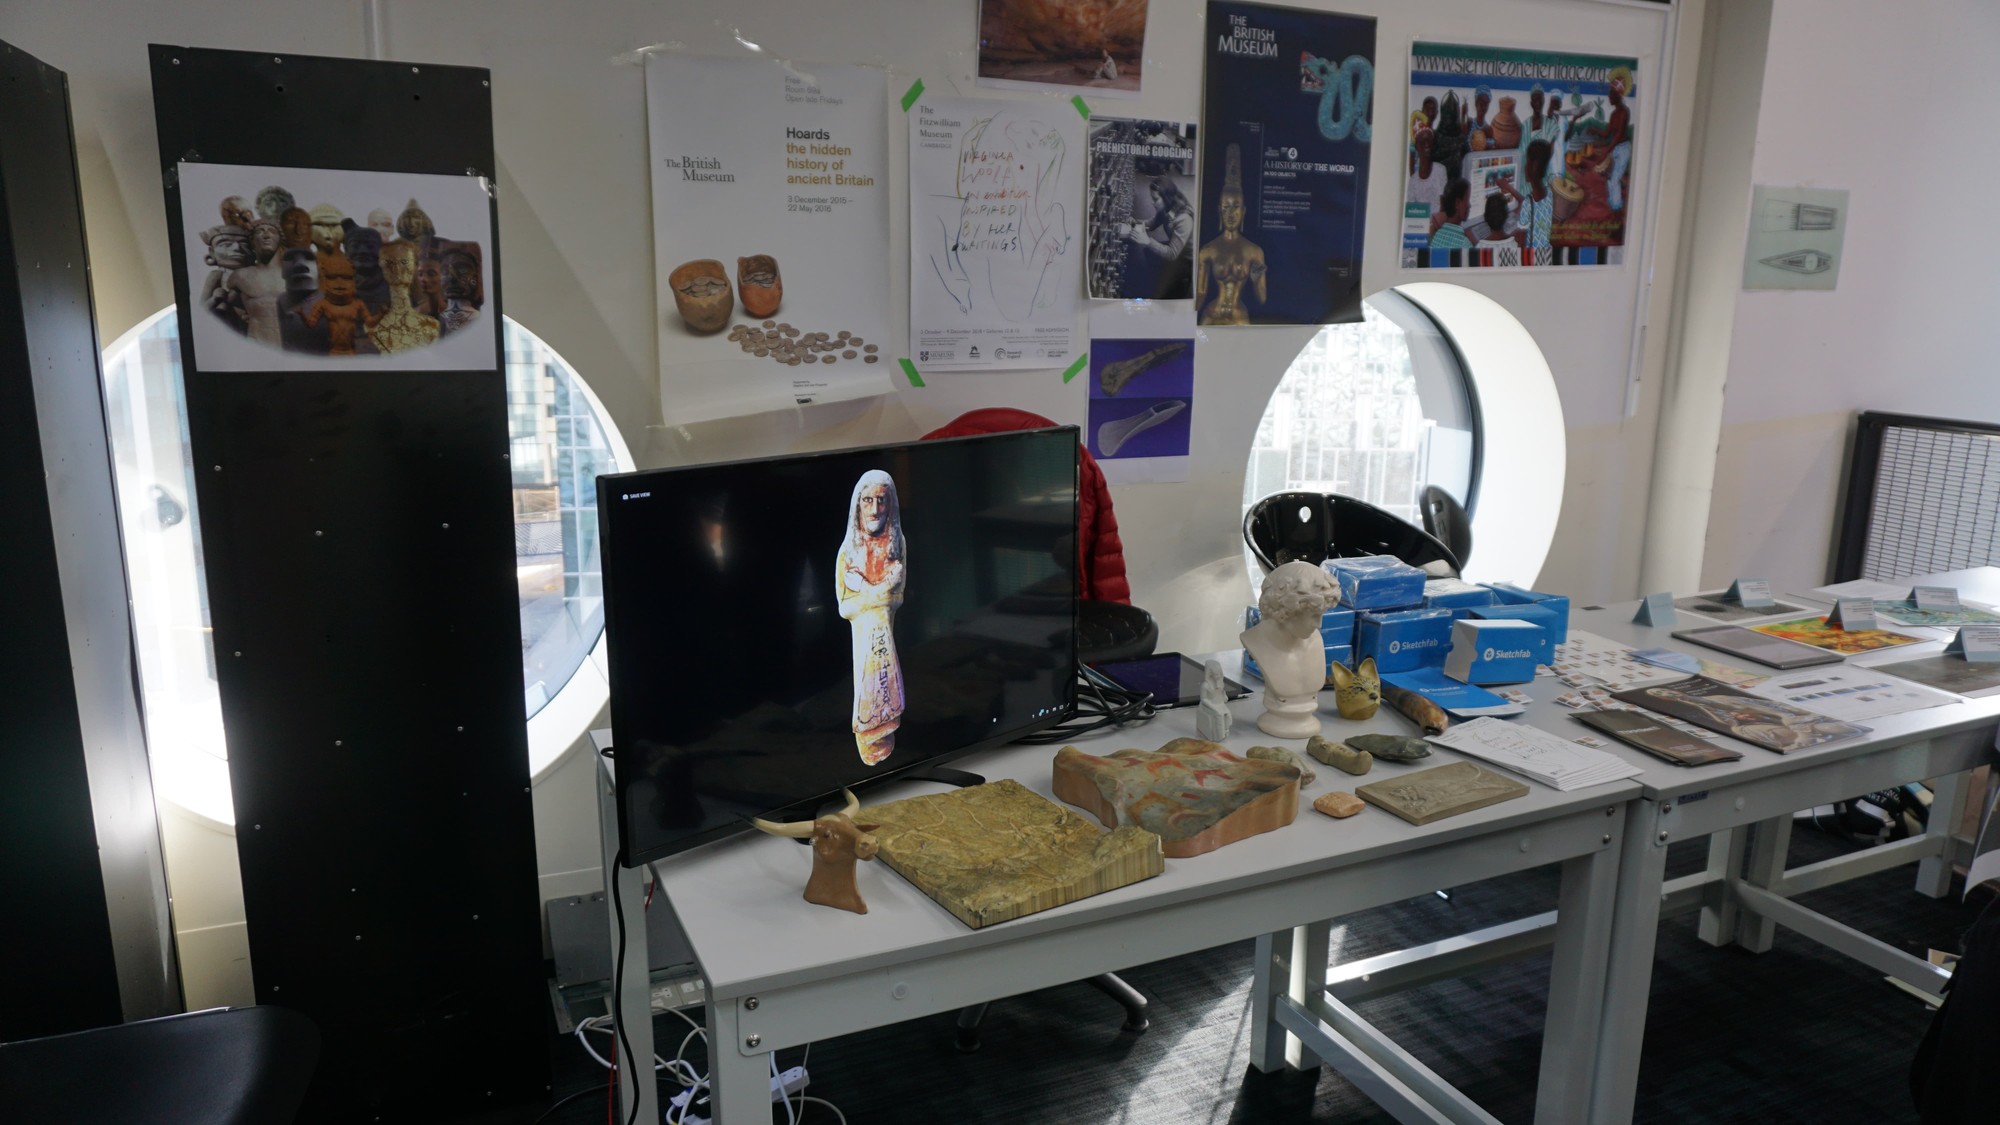 The pop up museum stand at Mozfest 2018